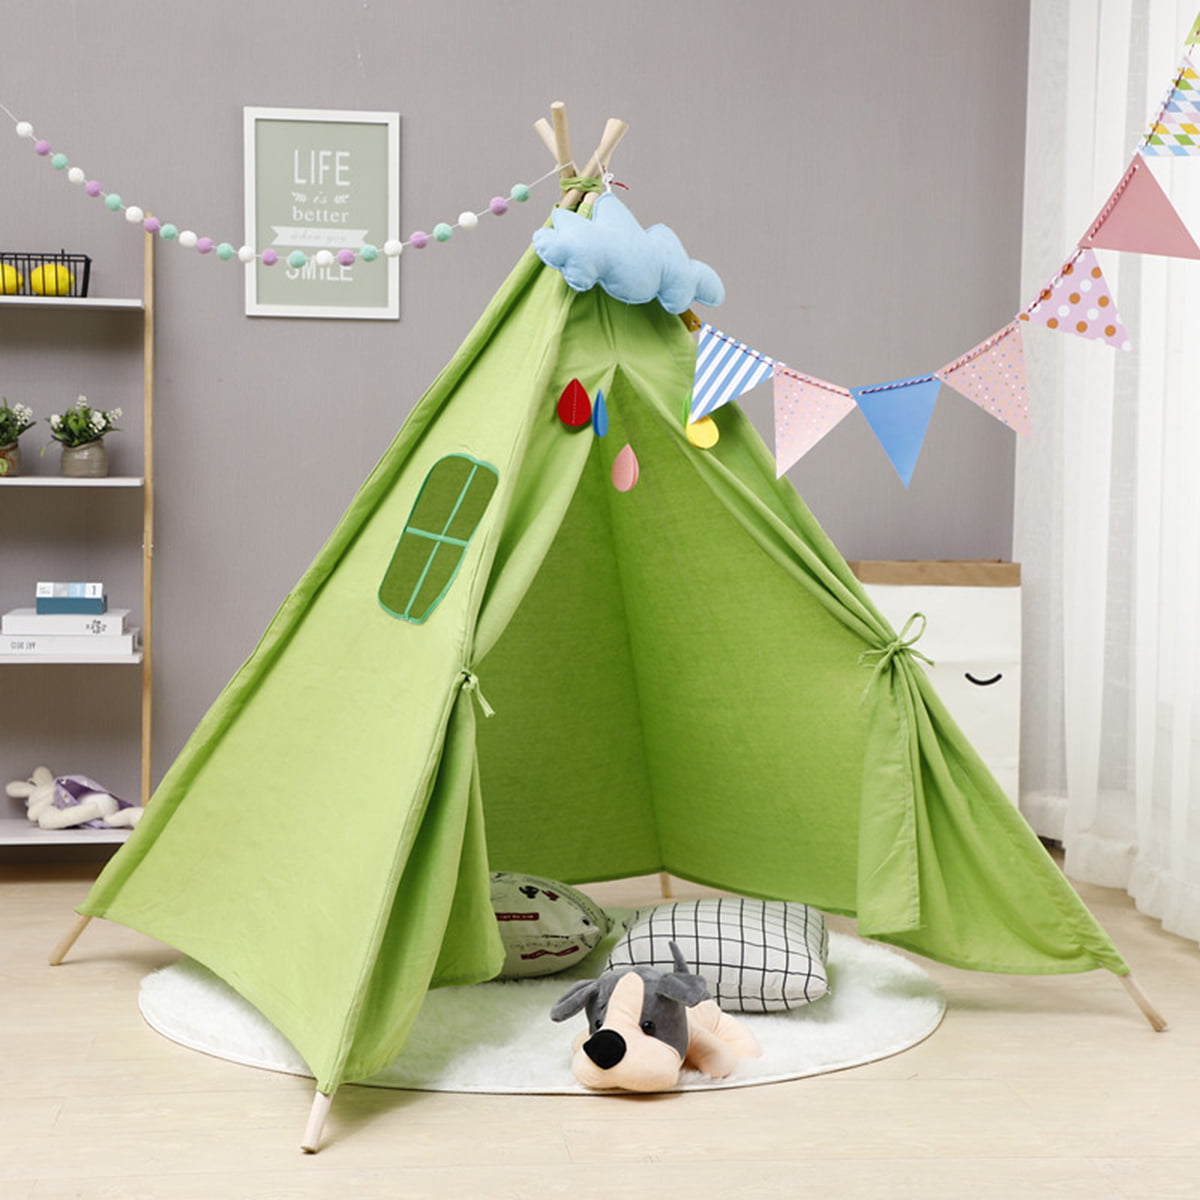 Portable Colorful Teepee Tent Kids Playhouse Sleeping Dome Children Play House 